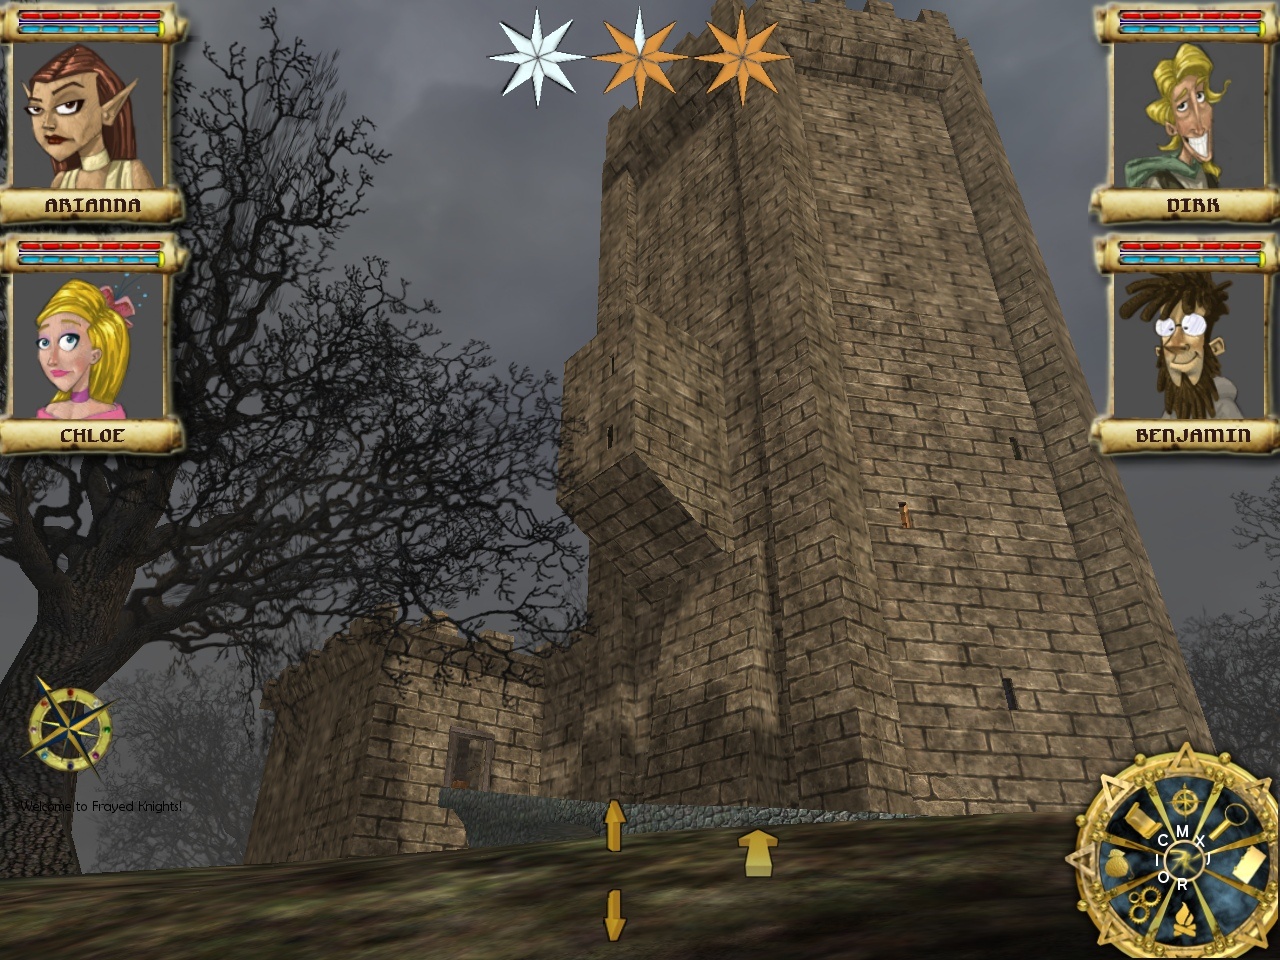 Beware the Tower of (Almost) Certain Death, where you may or may not almost certainly die.